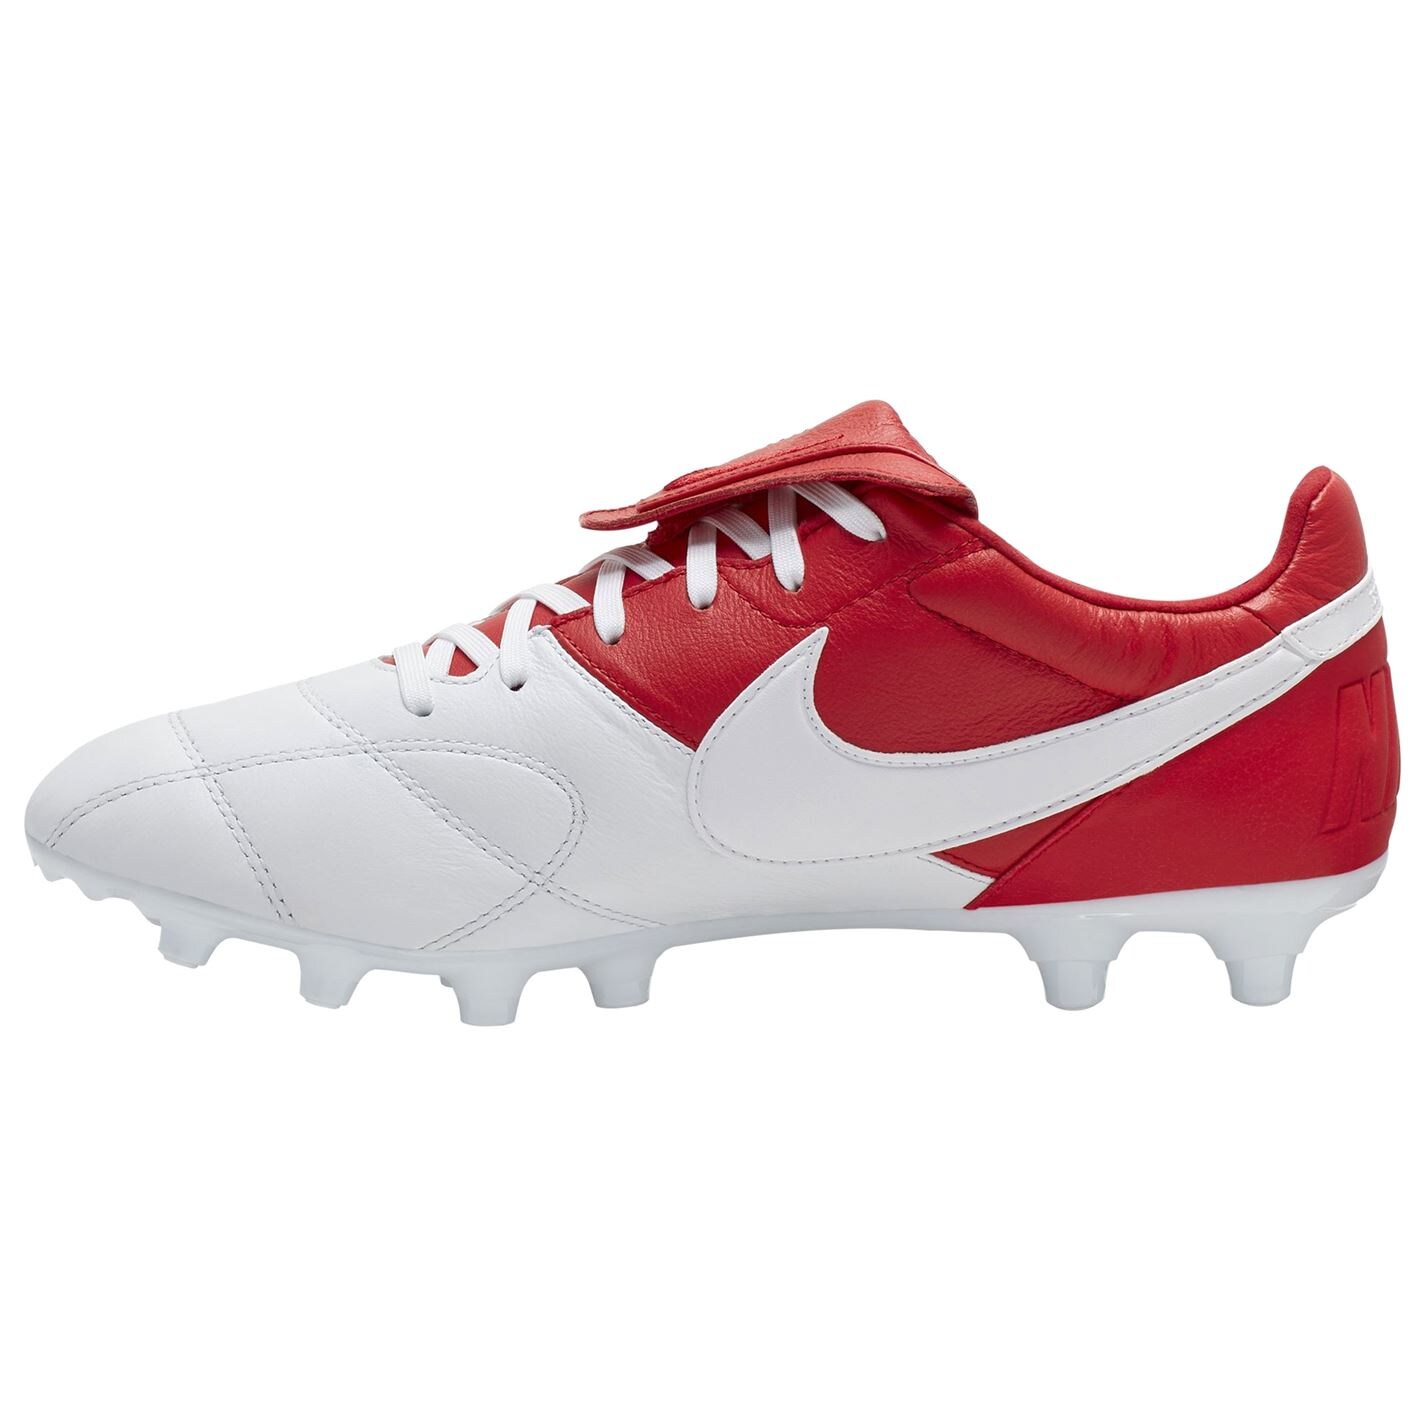 Nike Premier II FG Firm-Ground Soccer Cleat